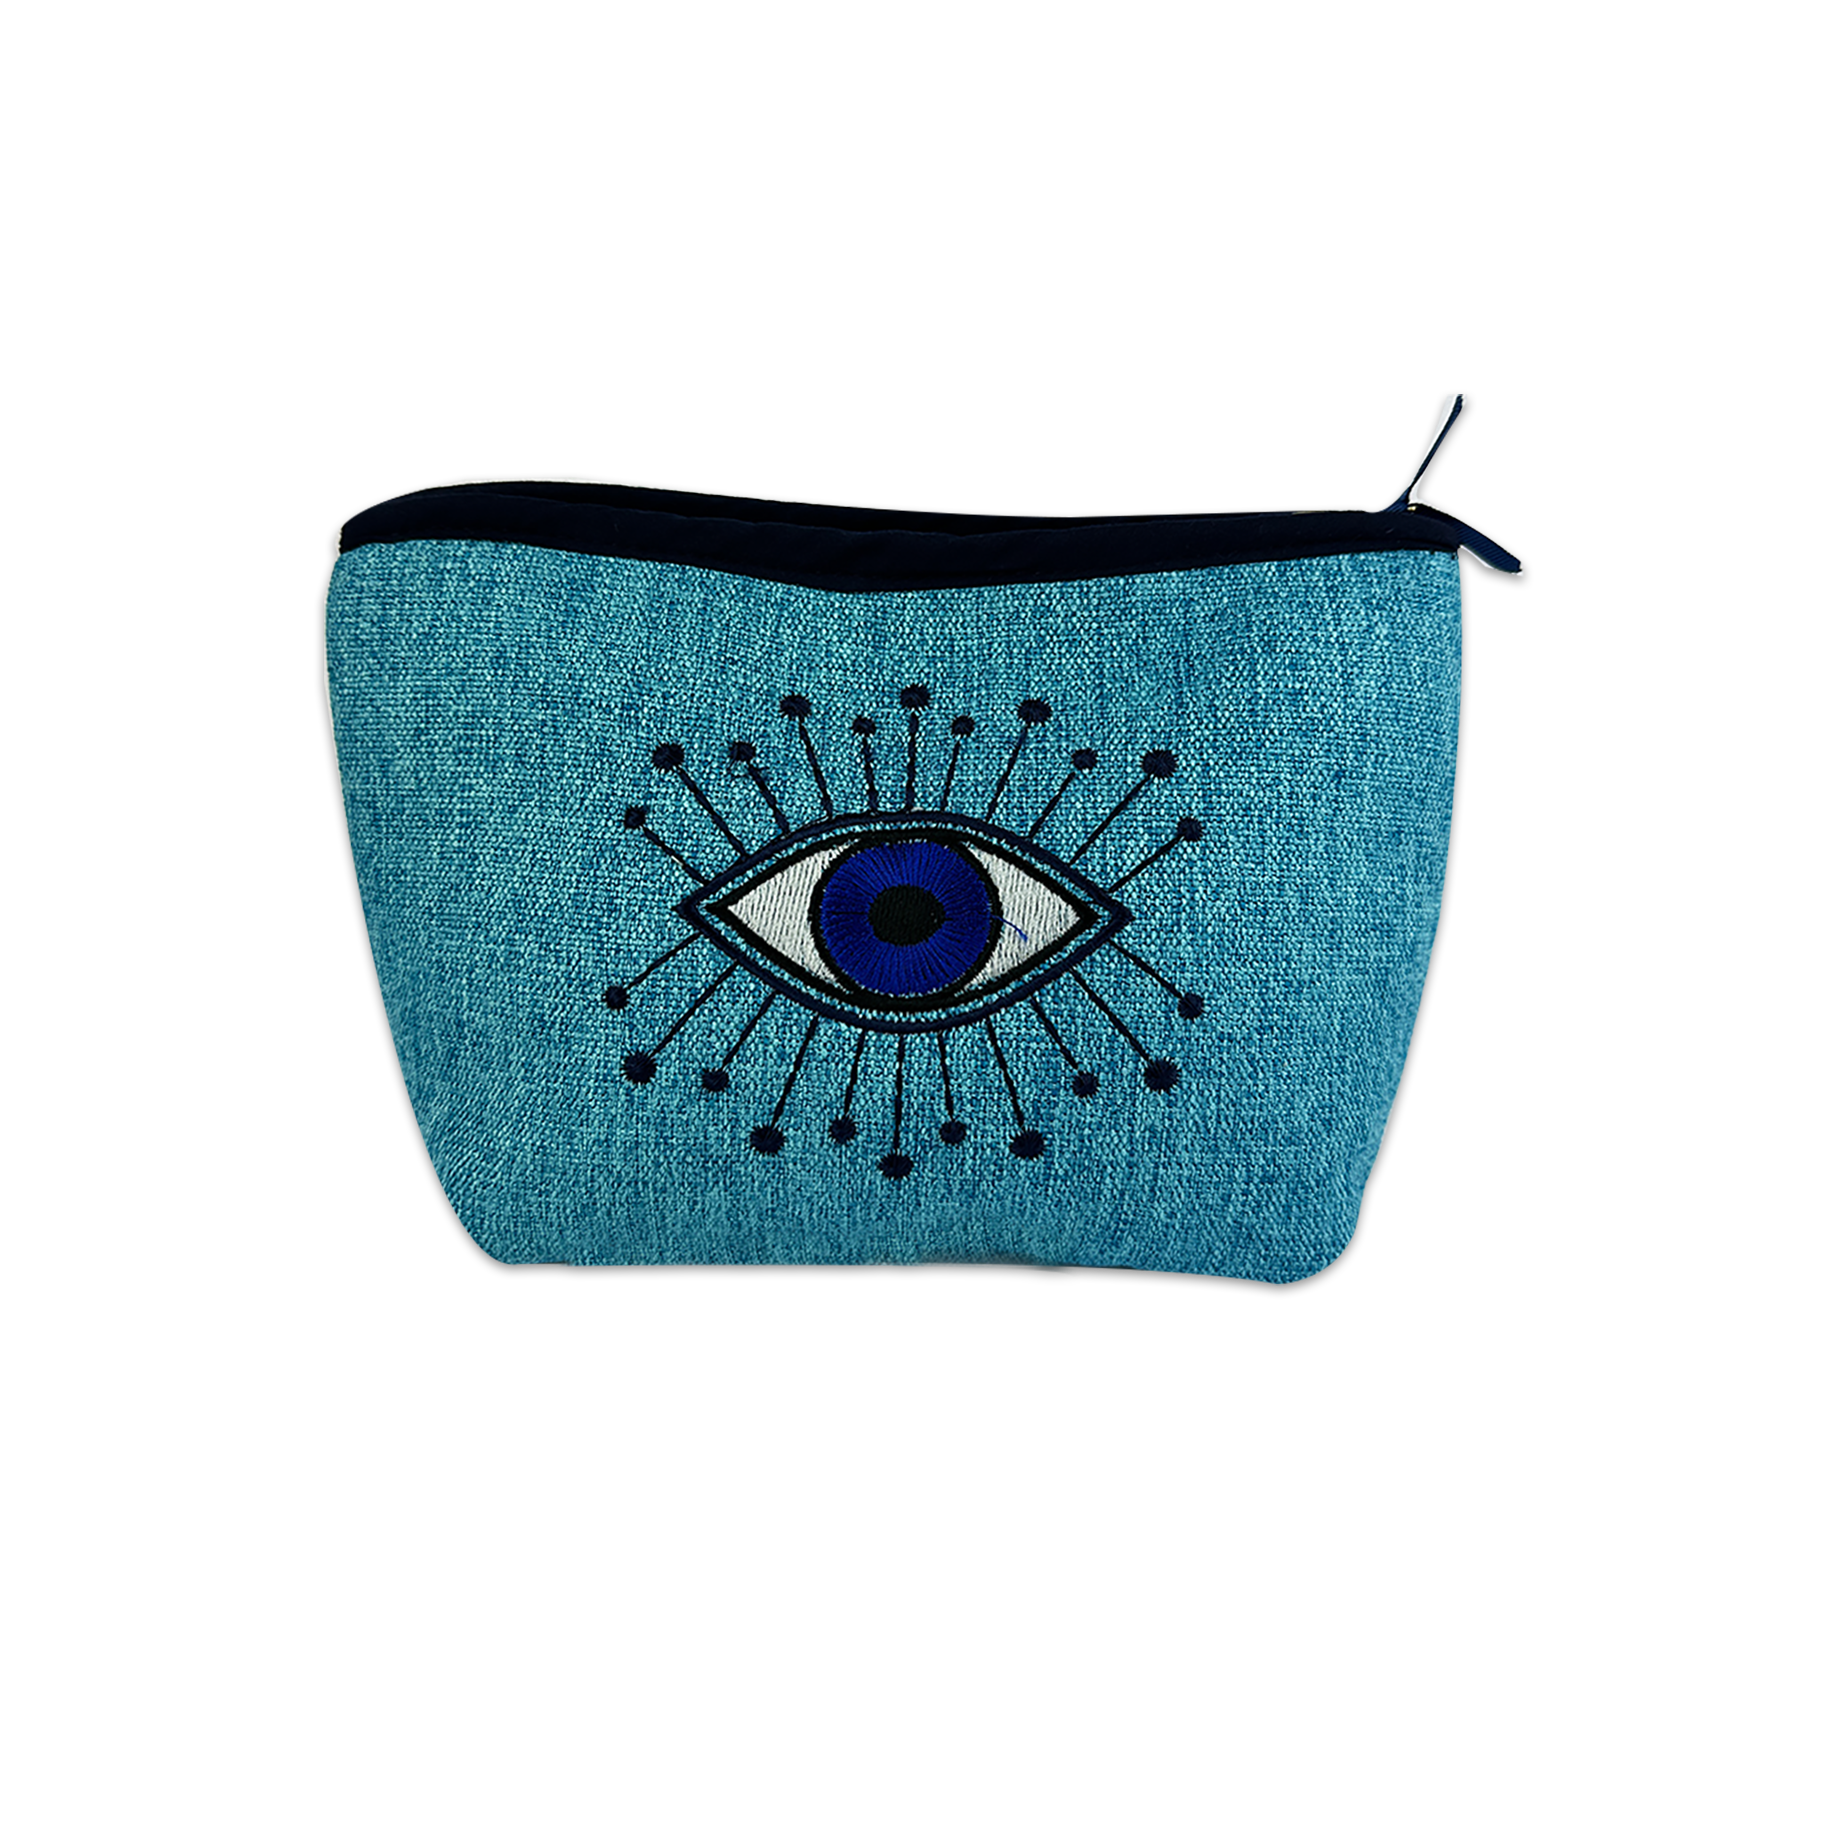 AIN WATER PROOF PURSE - Cypher Urban Roastery